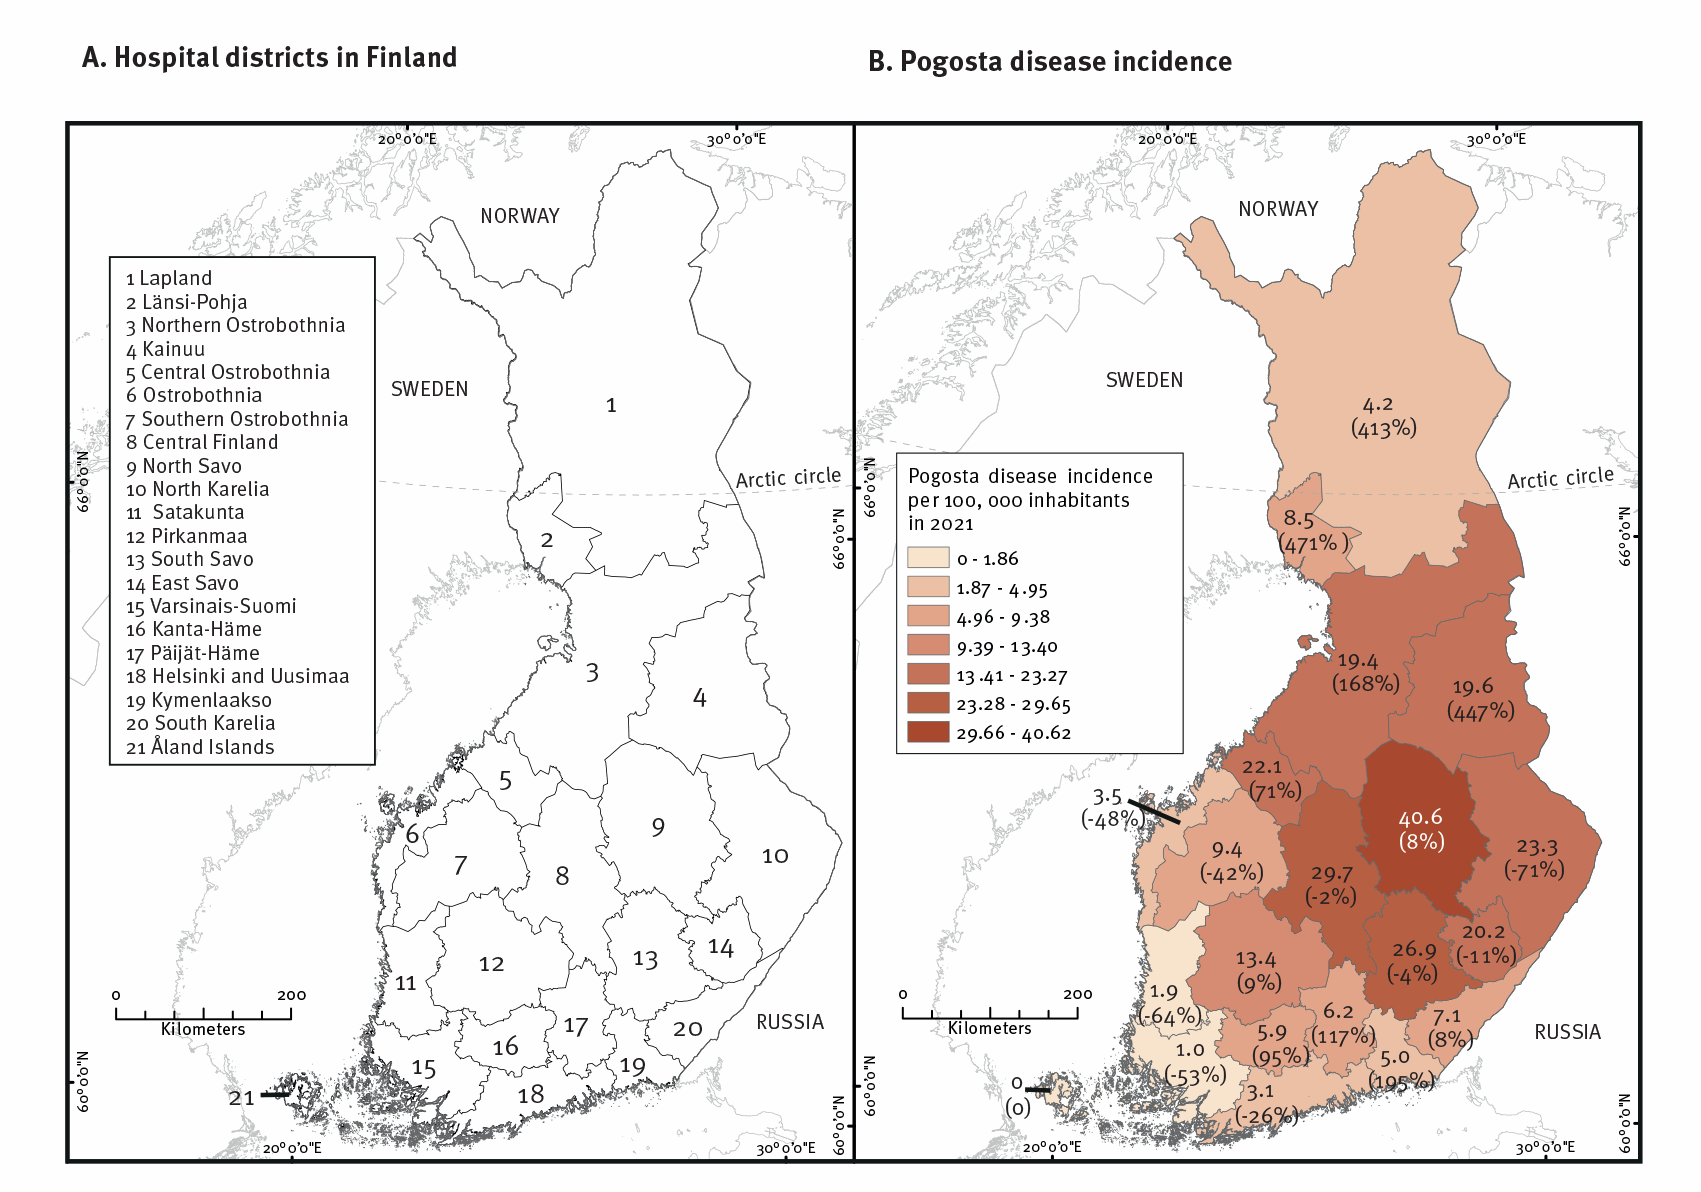 Pogosta disease incidence per 100,000 inhabitants, by the hospital district, Finland, 2021 (n = 566)